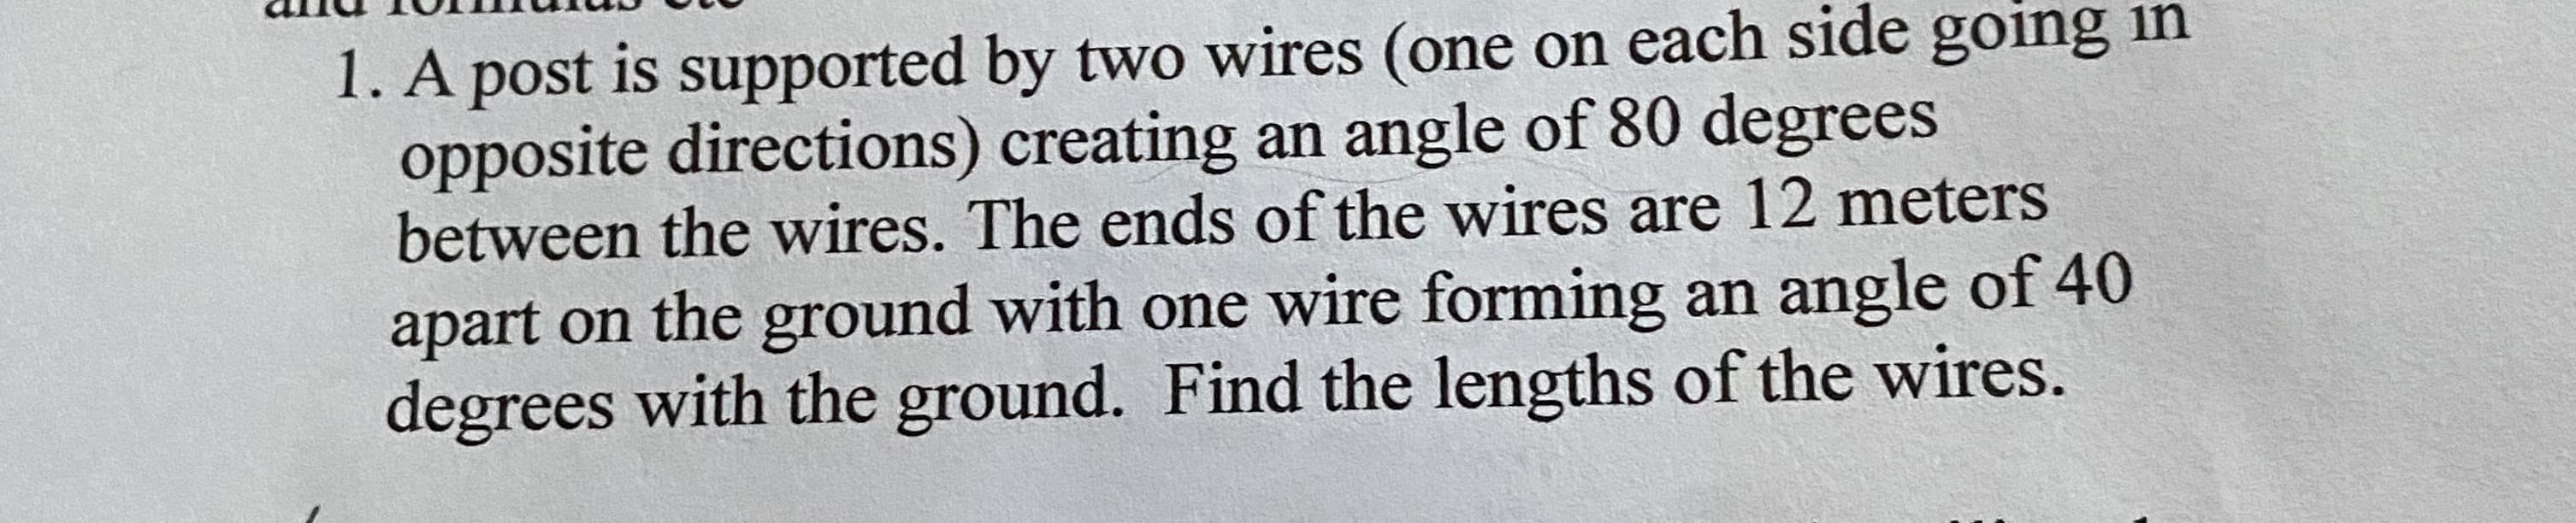 A post is supported by two wires (one on each side going in
opposite directions) creating an angle of 80 degrees
between the wires. The ends of the wires are 12 meters
apart on the ground with one wire forming an angle of 40
degrees with the ground. Find the lengths of the wires.
